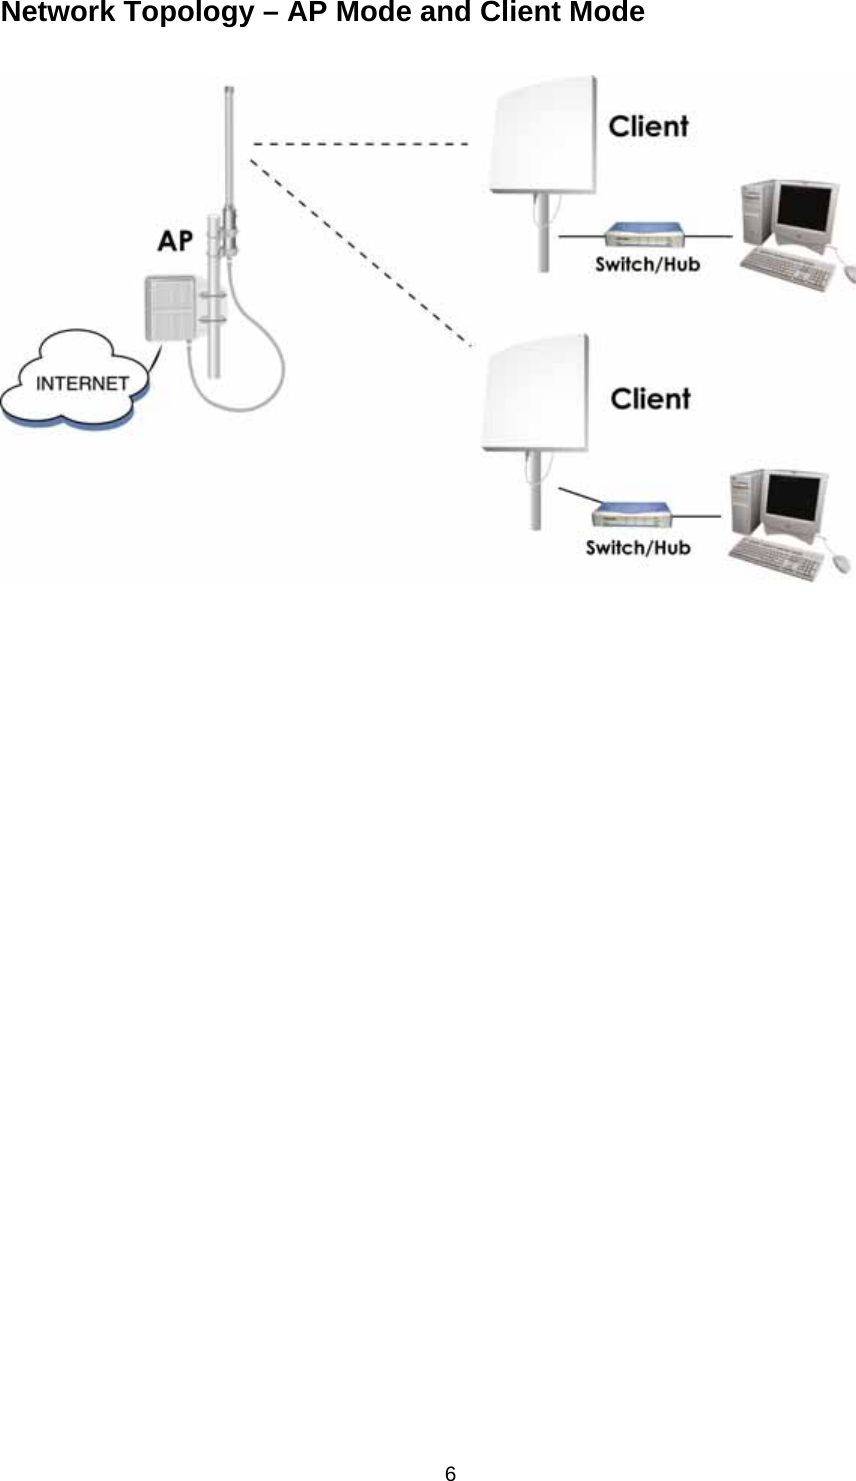  6Network Topology – AP Mode and Client Mode    